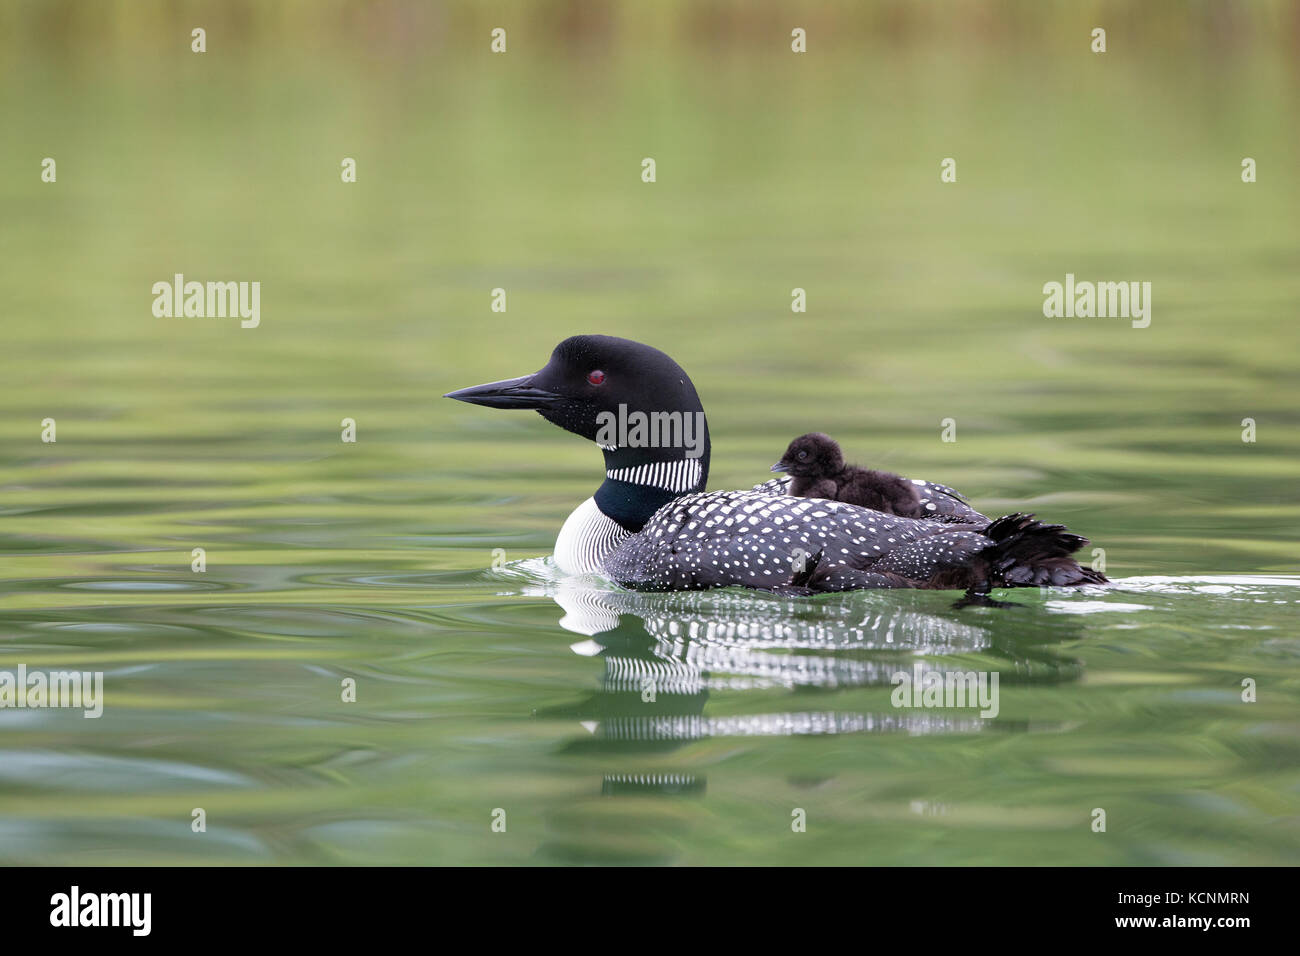 Common loon (Gavia immer), adult with chick on back, Cariboo Region, British Columbia, Canada. Stock Photo